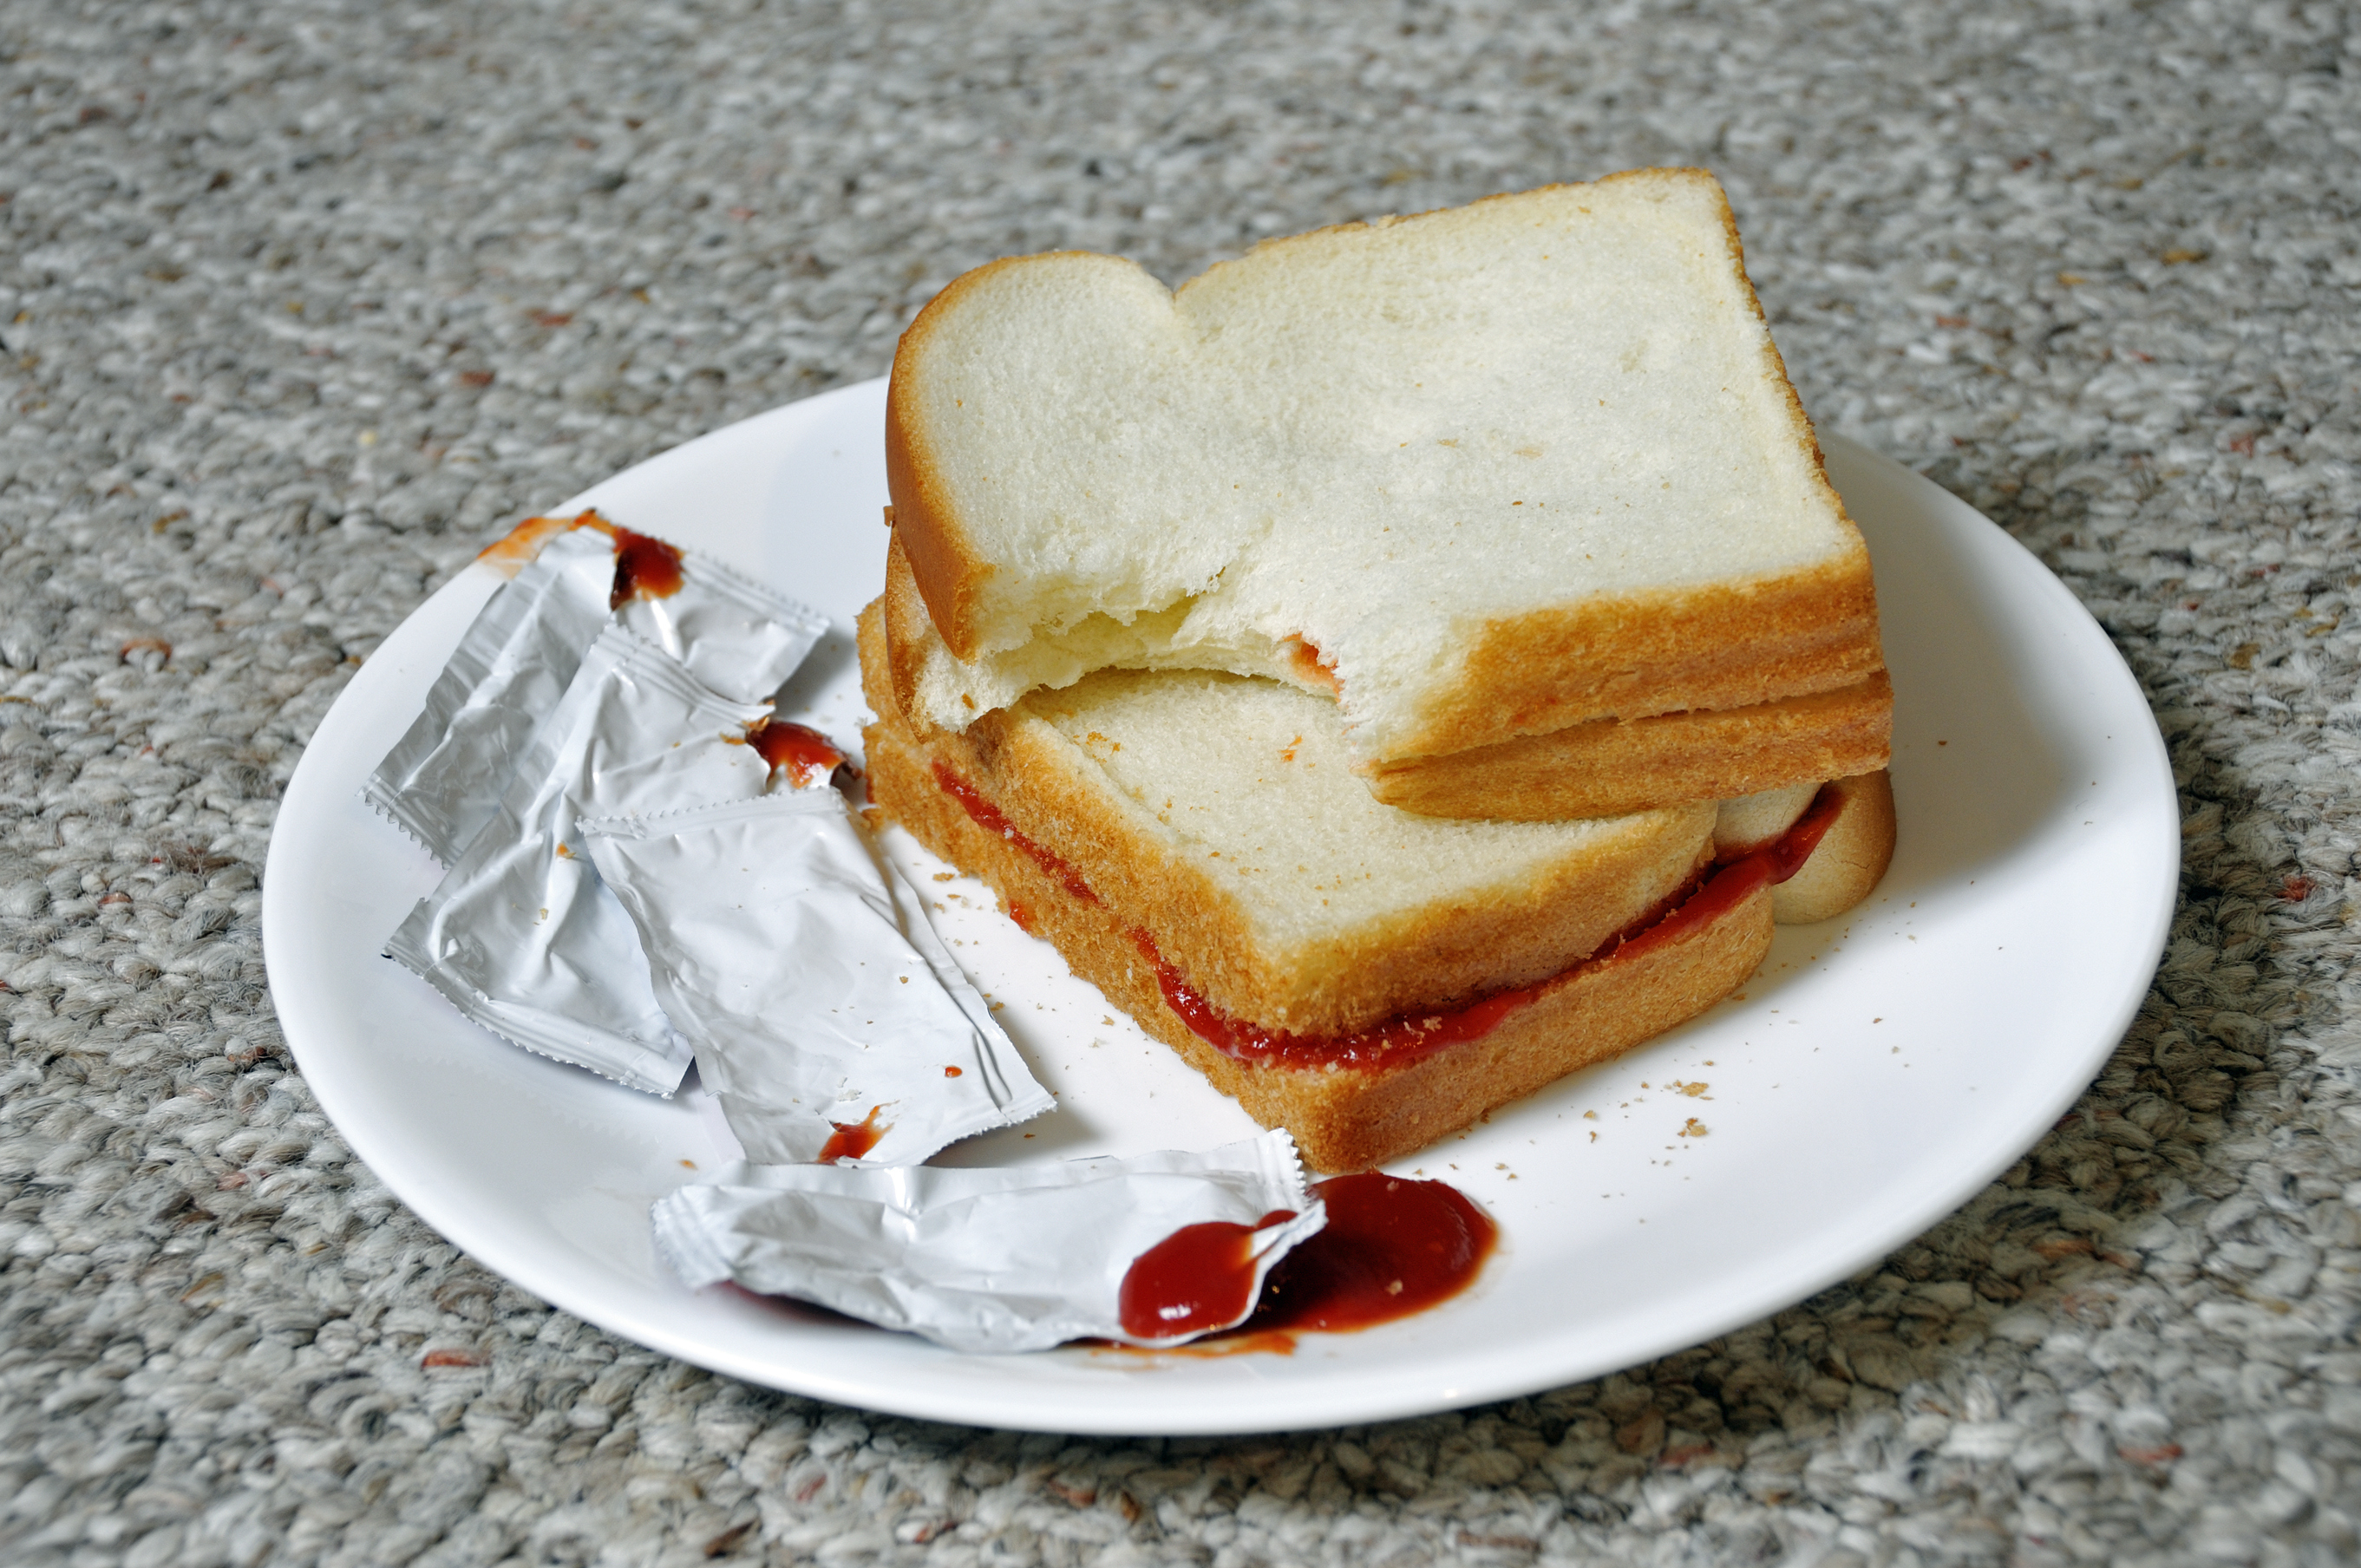 A half-eaten sandwich with ketchup and an empty condiment packet on a white plate